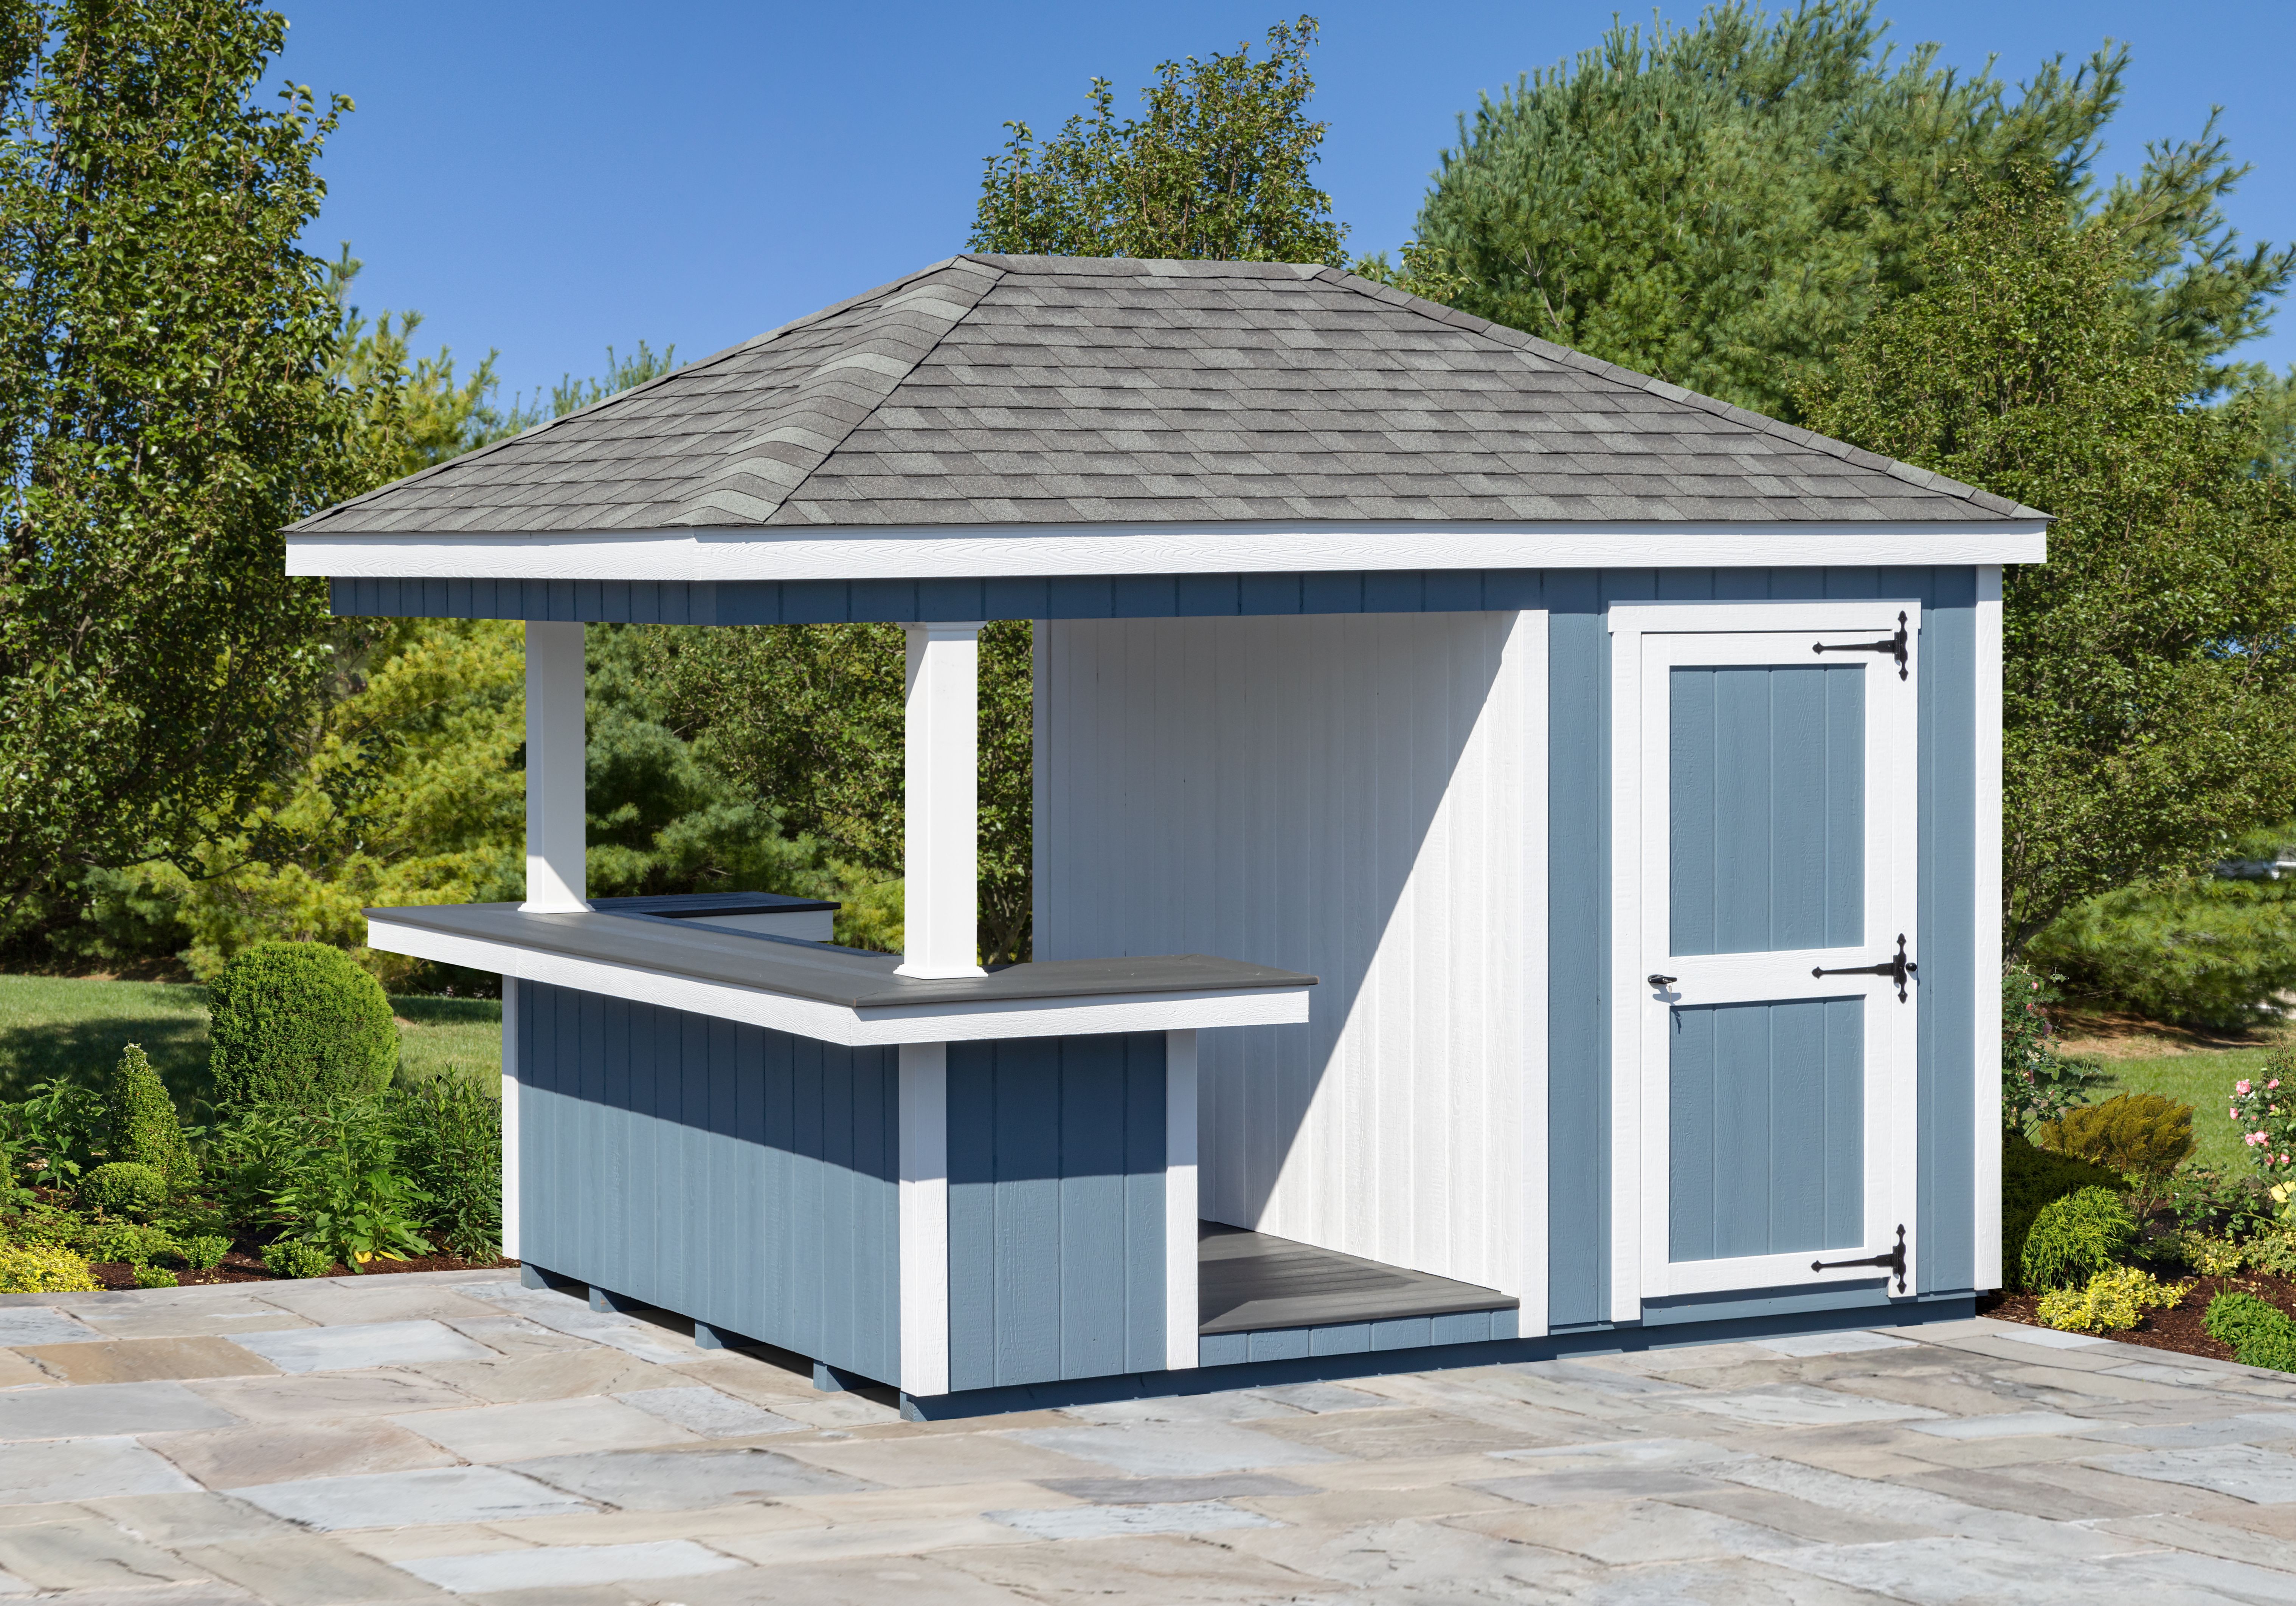 Pool Houses for Pond View Mini Structures in  Strasburg, PA